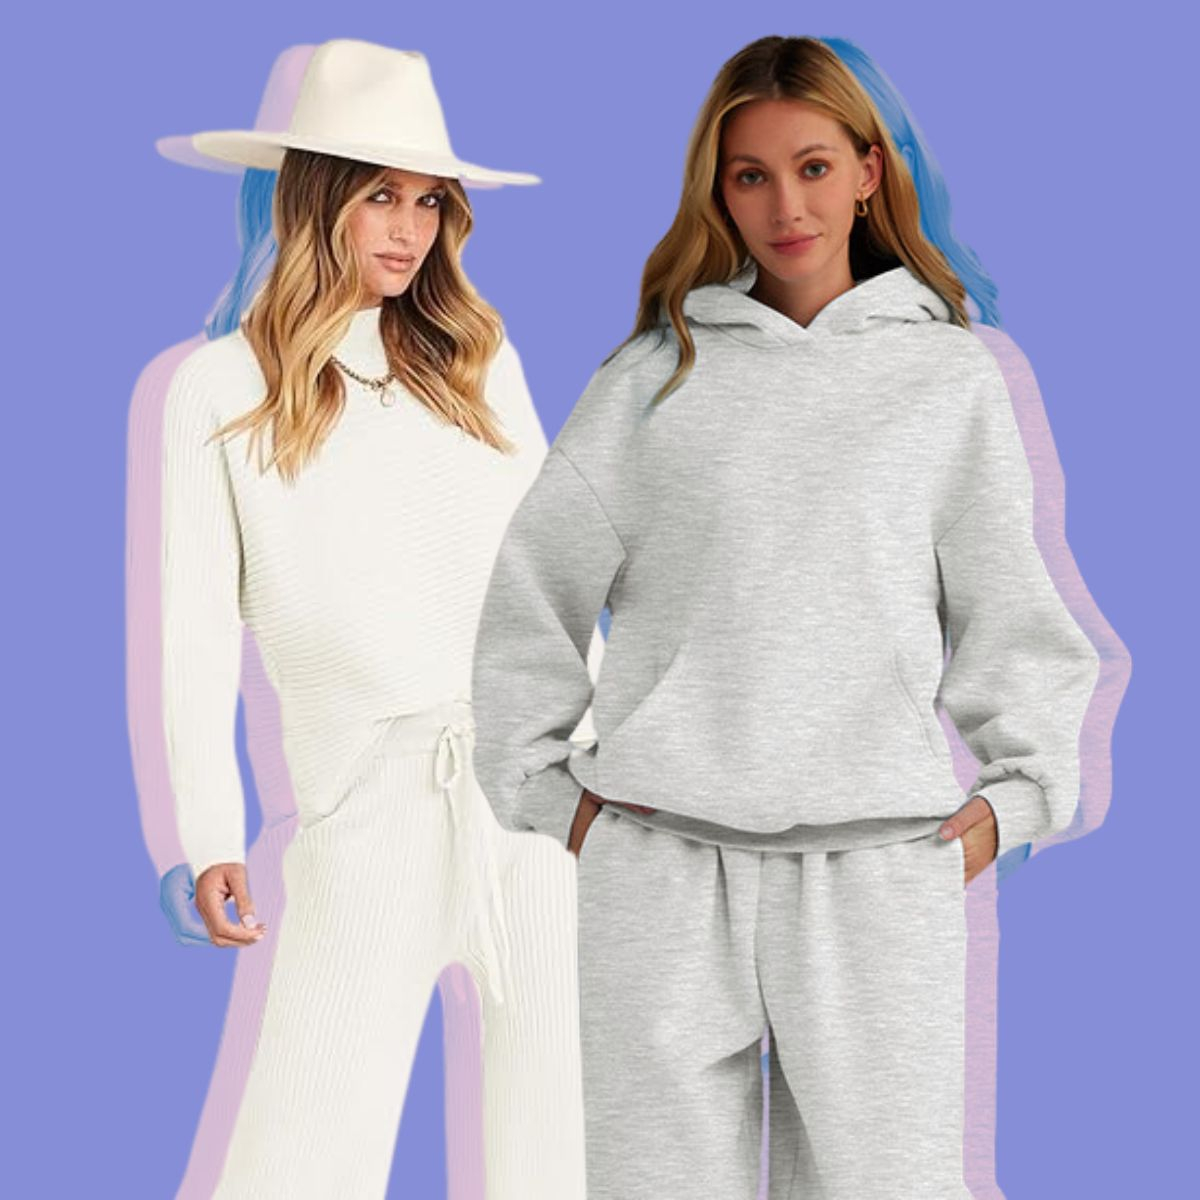 ETCYY NEW Womens Elegant Lounge Sets Knitted Sweatsuit Sets 2 Piece Outfits  with Sweater Tops and Wide Leg Sweatpants